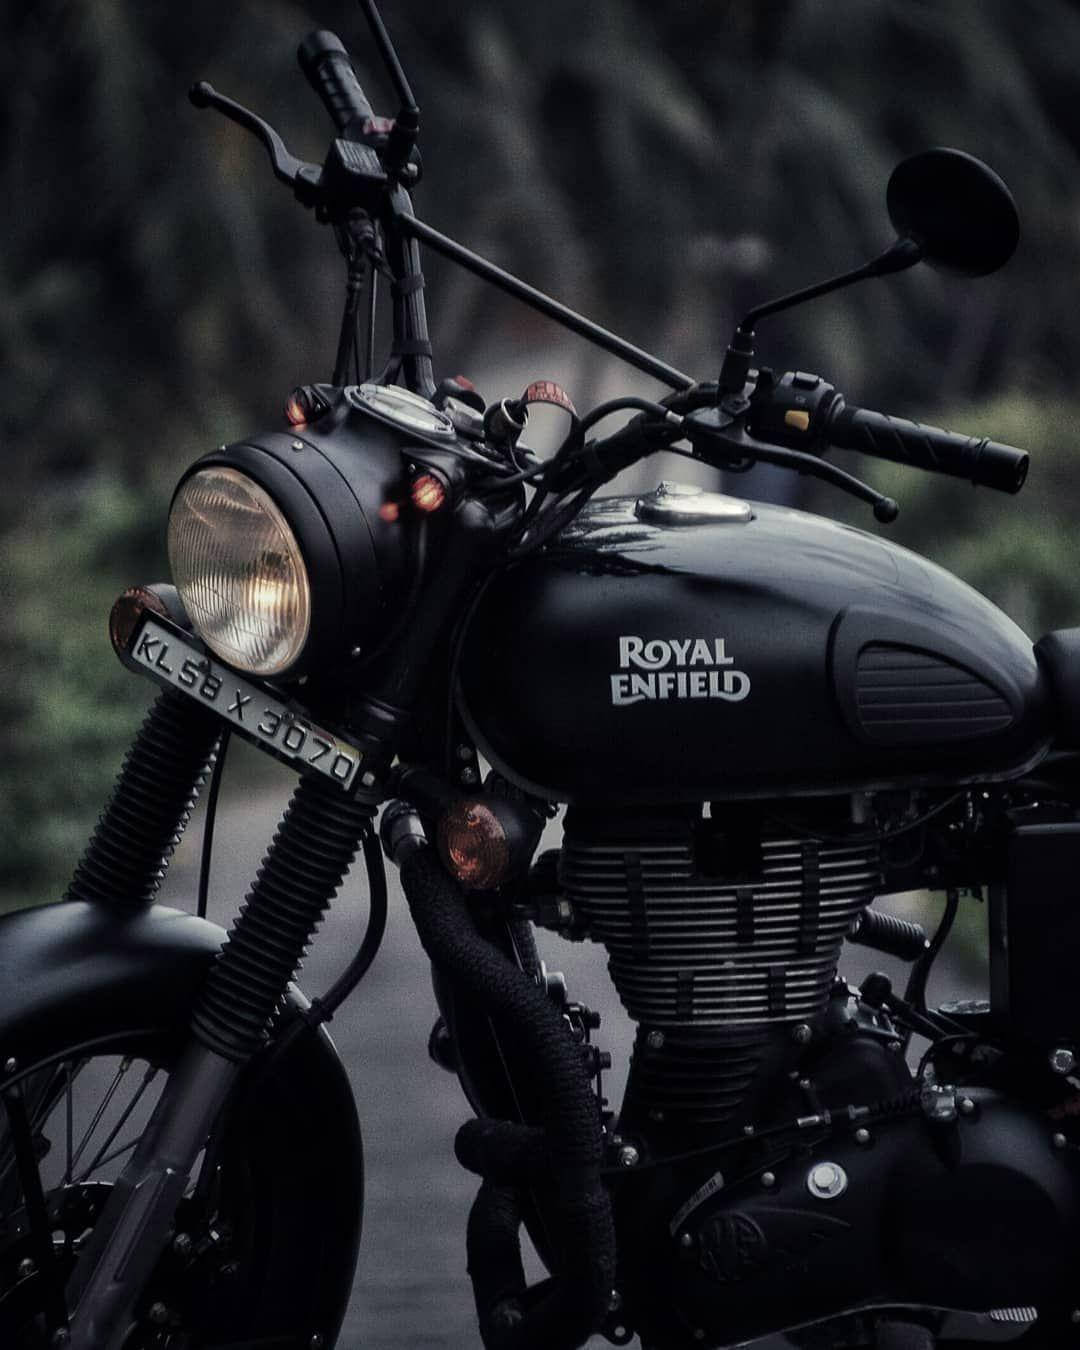 Caption: Majestic Royal Enfield In High Definition Background